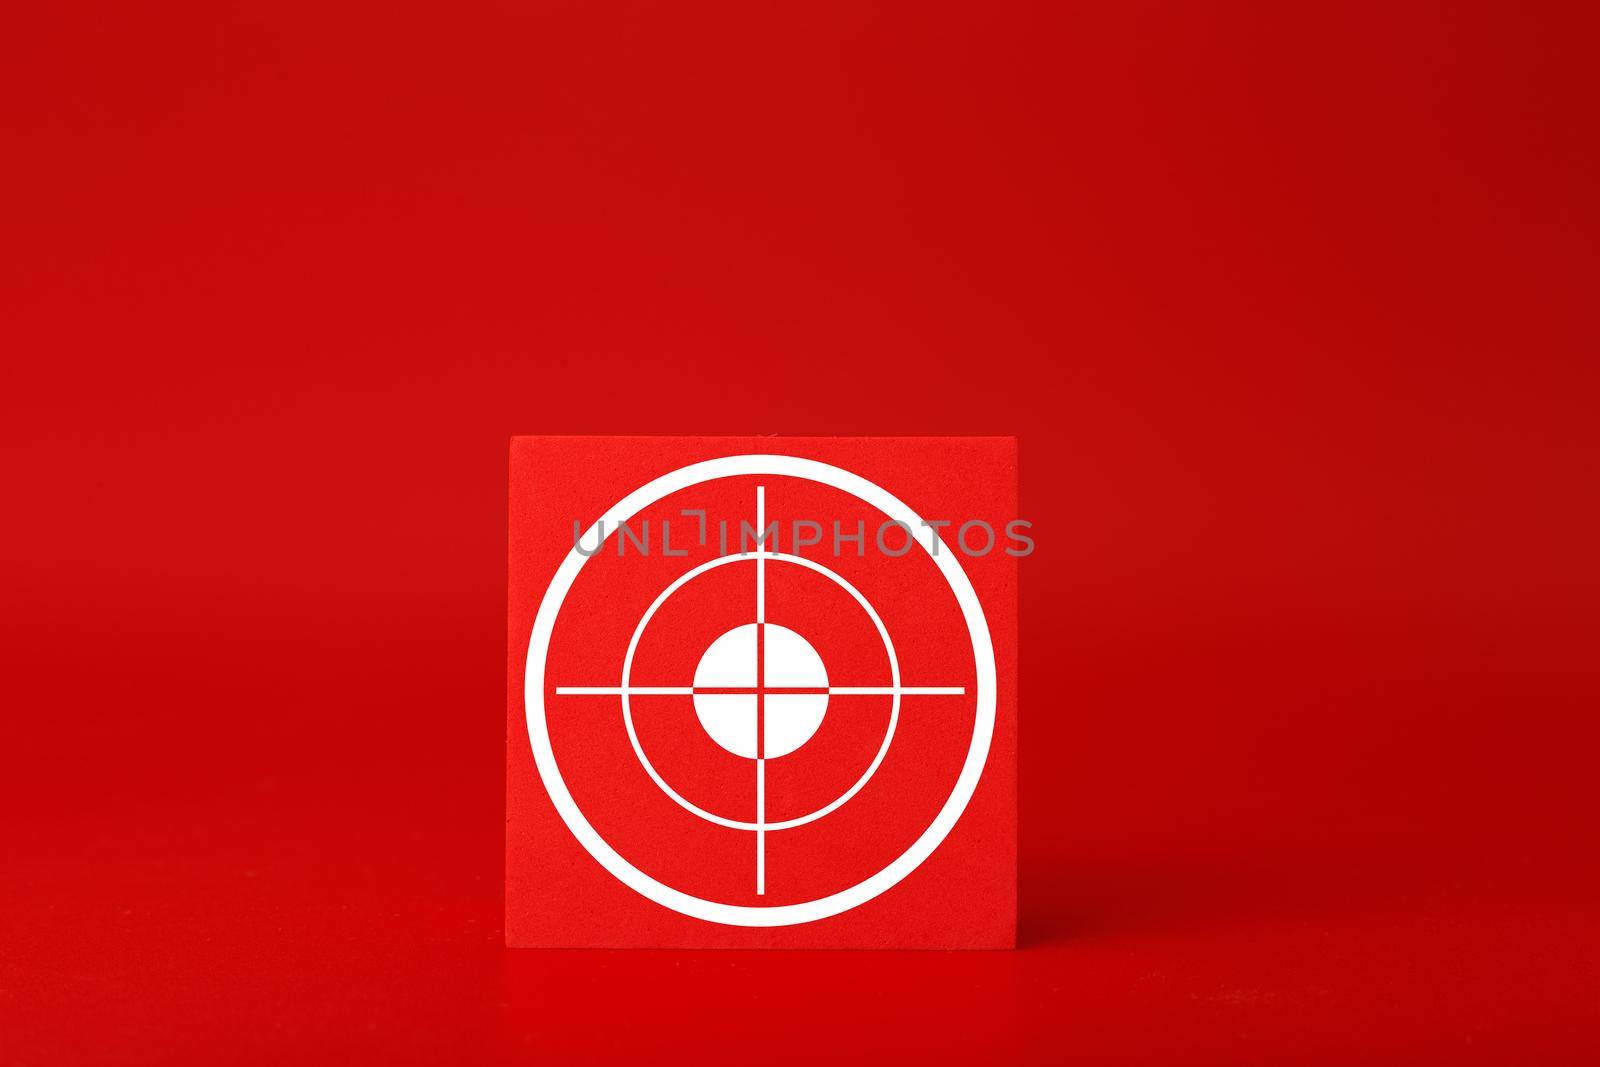 Goal symbol on red toy cube in the middle of red background. Concept of goal, success, reaching business and personal aims